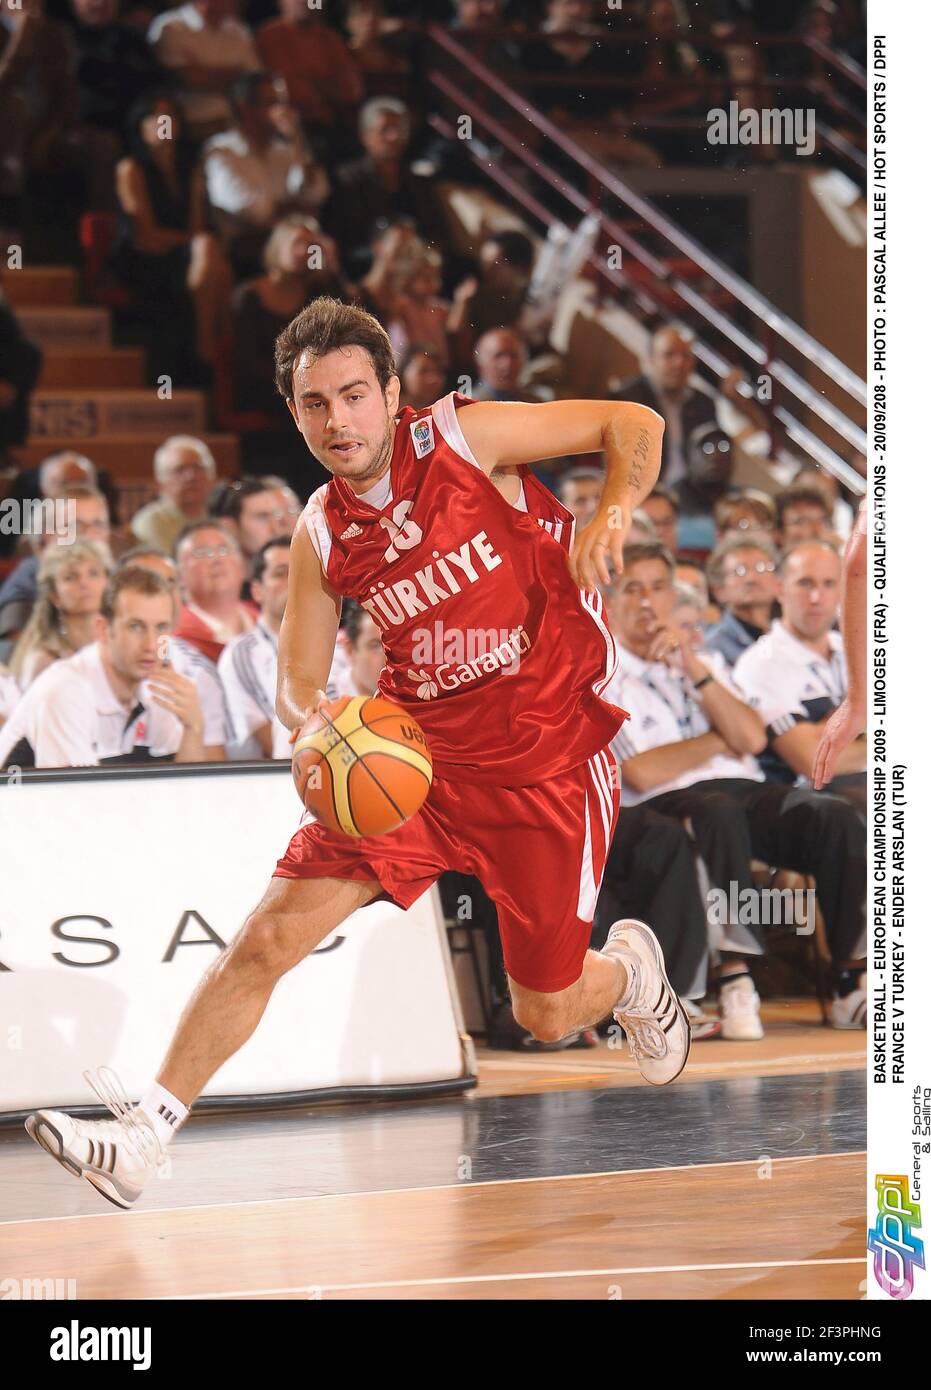 BASKET-BALL - CHAMPIONNAT D'EUROPE 2009 - LIMOGES (FRA) - QUALIFICATIONS -  20/09/208 - PHOTO : PASCAL ALLEE / SPORTS CHAUDS / DPPI FRANCE V TURQUIE -  ENDER ARSLAN (TUR Photo Stock - Alamy